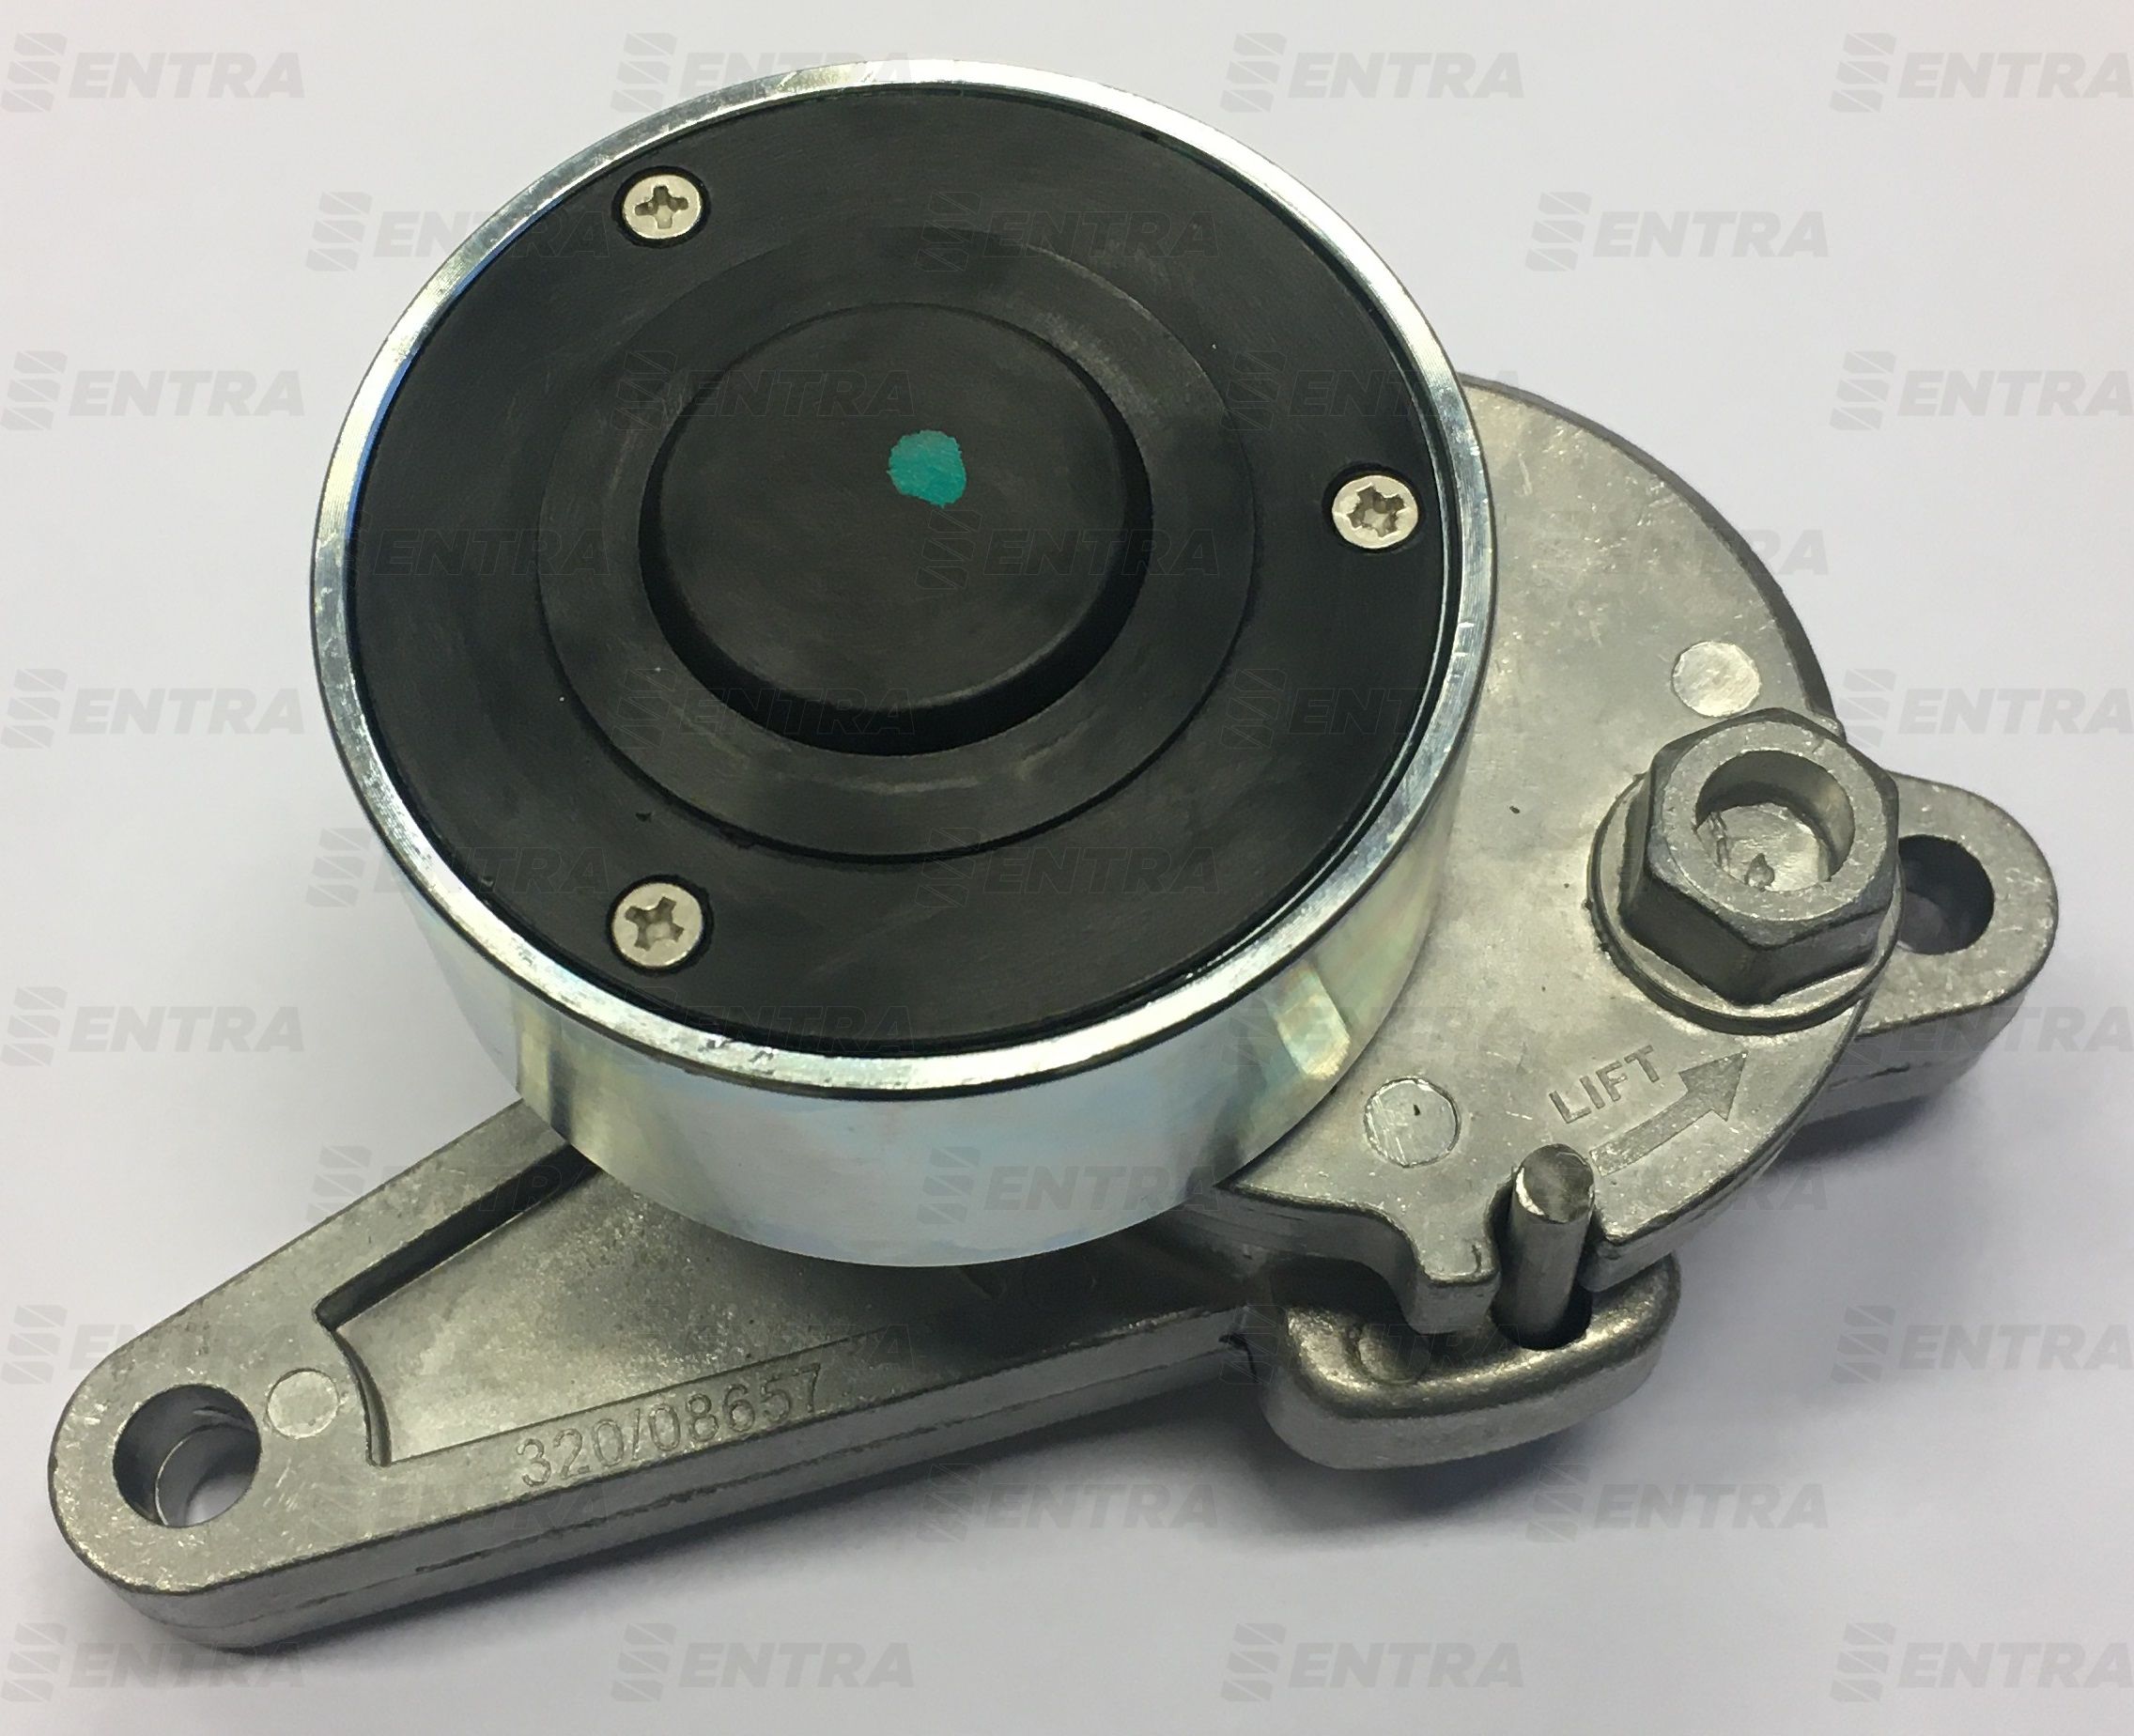 Jcb 3 A8538 Adjuster One Piece Pulley Ex 3 3 3 3 Part Entra Parts